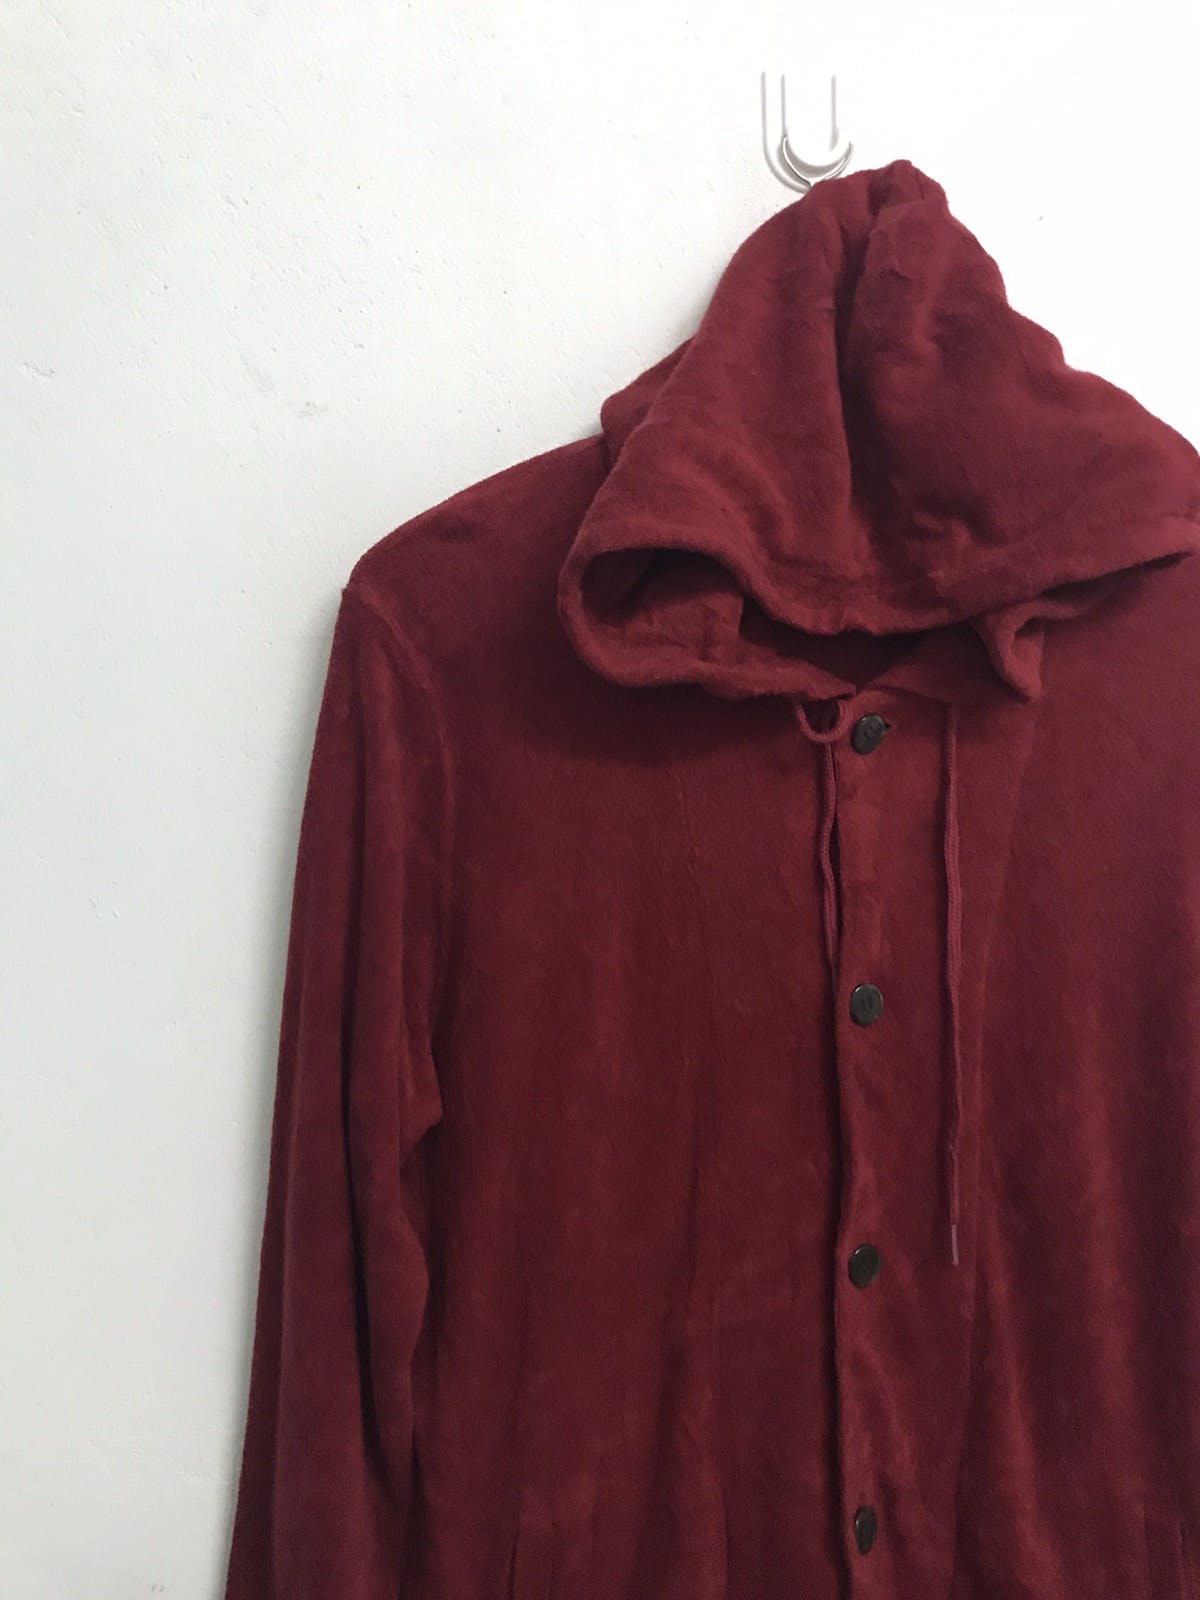 Paul Smith Button Up Hoodie Jacket Made in Japan - 4